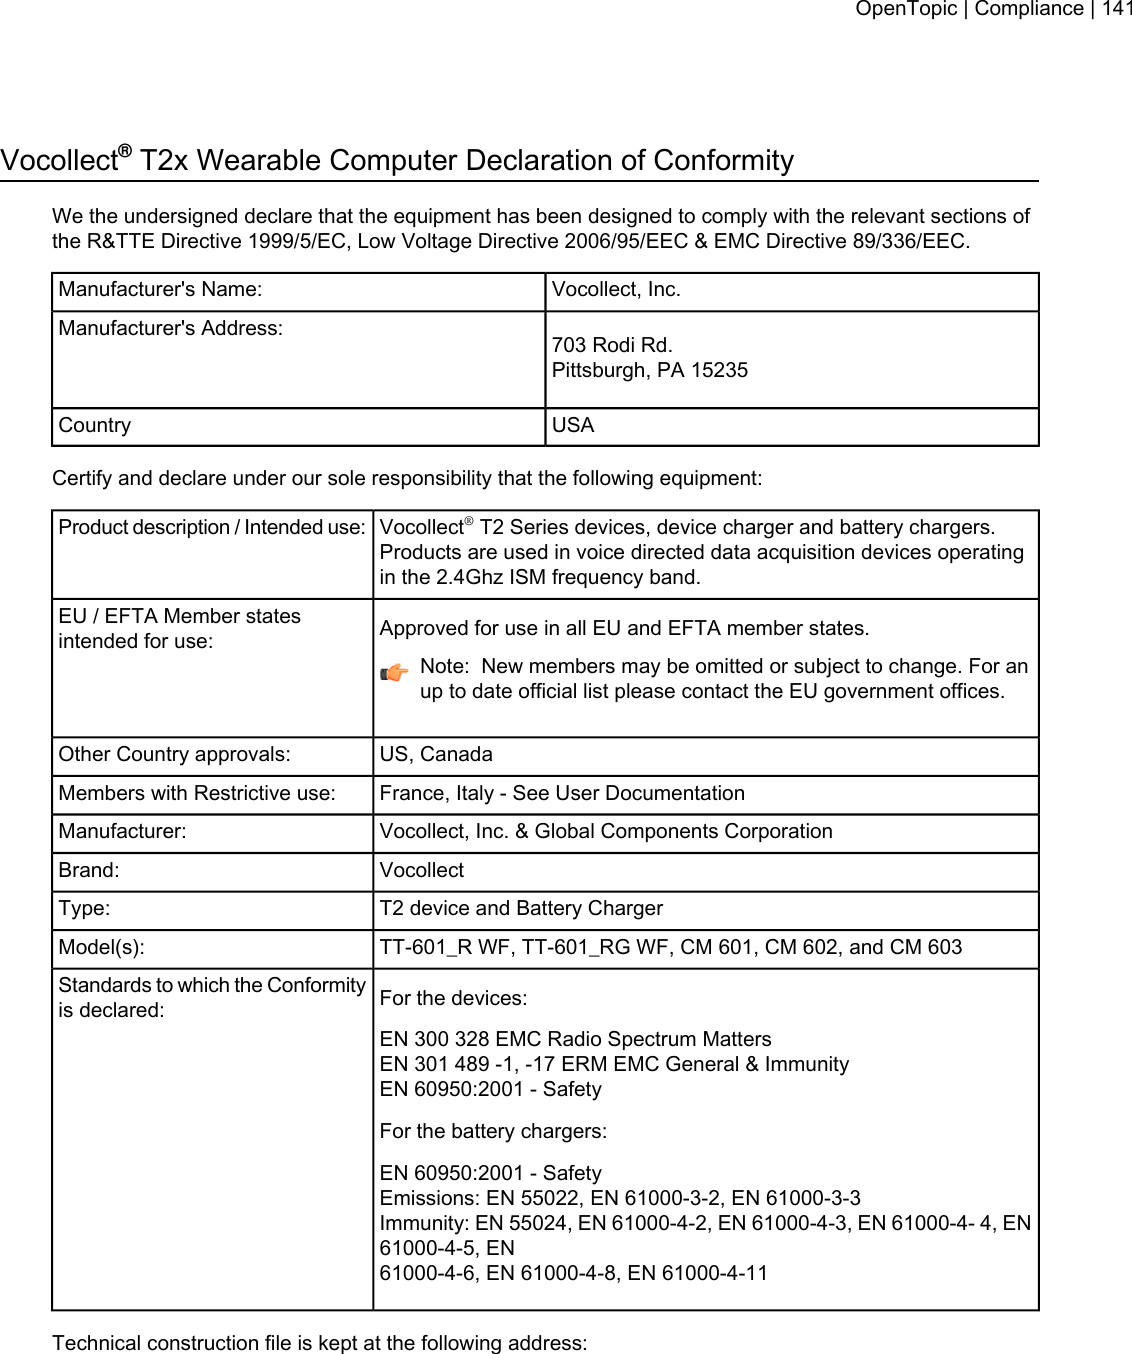 Vocollect®T2x Wearable Computer Declaration of ConformityWe the undersigned declare that the equipment has been designed to comply with the relevant sections ofthe R&amp;TTE Directive 1999/5/EC, Low Voltage Directive 2006/95/EEC &amp; EMC Directive 89/336/EEC.Vocollect, Inc.Manufacturer&apos;s Name:703 Rodi Rd.Pittsburgh, PA 15235Manufacturer&apos;s Address:USACountryCertify and declare under our sole responsibility that the following equipment:Vocollect®T2 Series devices, device charger and battery chargers.Products are used in voice directed data acquisition devices operatingin the 2.4Ghz ISM frequency band.Product description / Intended use:Approved for use in all EU and EFTA member states.EU / EFTA Member statesintended for use:Note: New members may be omitted or subject to change. For anup to date official list please contact the EU government offices.US, CanadaOther Country approvals:France, Italy - See User DocumentationMembers with Restrictive use:Vocollect, Inc. &amp; Global Components CorporationManufacturer:VocollectBrand:T2 device and Battery ChargerType:TT-601_R WF, TT-601_RG WF, CM 601, CM 602, and CM 603Model(s):For the devices:Standards to which the Conformityis declared:EN 300 328 EMC Radio Spectrum MattersEN 301 489 -1, -17 ERM EMC General &amp; ImmunityEN 60950:2001 - SafetyFor the battery chargers:EN 60950:2001 - SafetyEmissions: EN 55022, EN 61000-3-2, EN 61000-3-3Immunity: EN 55024, EN 61000-4-2, EN 61000-4-3, EN 61000-4- 4, EN61000-4-5, EN61000-4-6, EN 61000-4-8, EN 61000-4-11Technical construction file is kept at the following address:OpenTopic | Compliance | 141